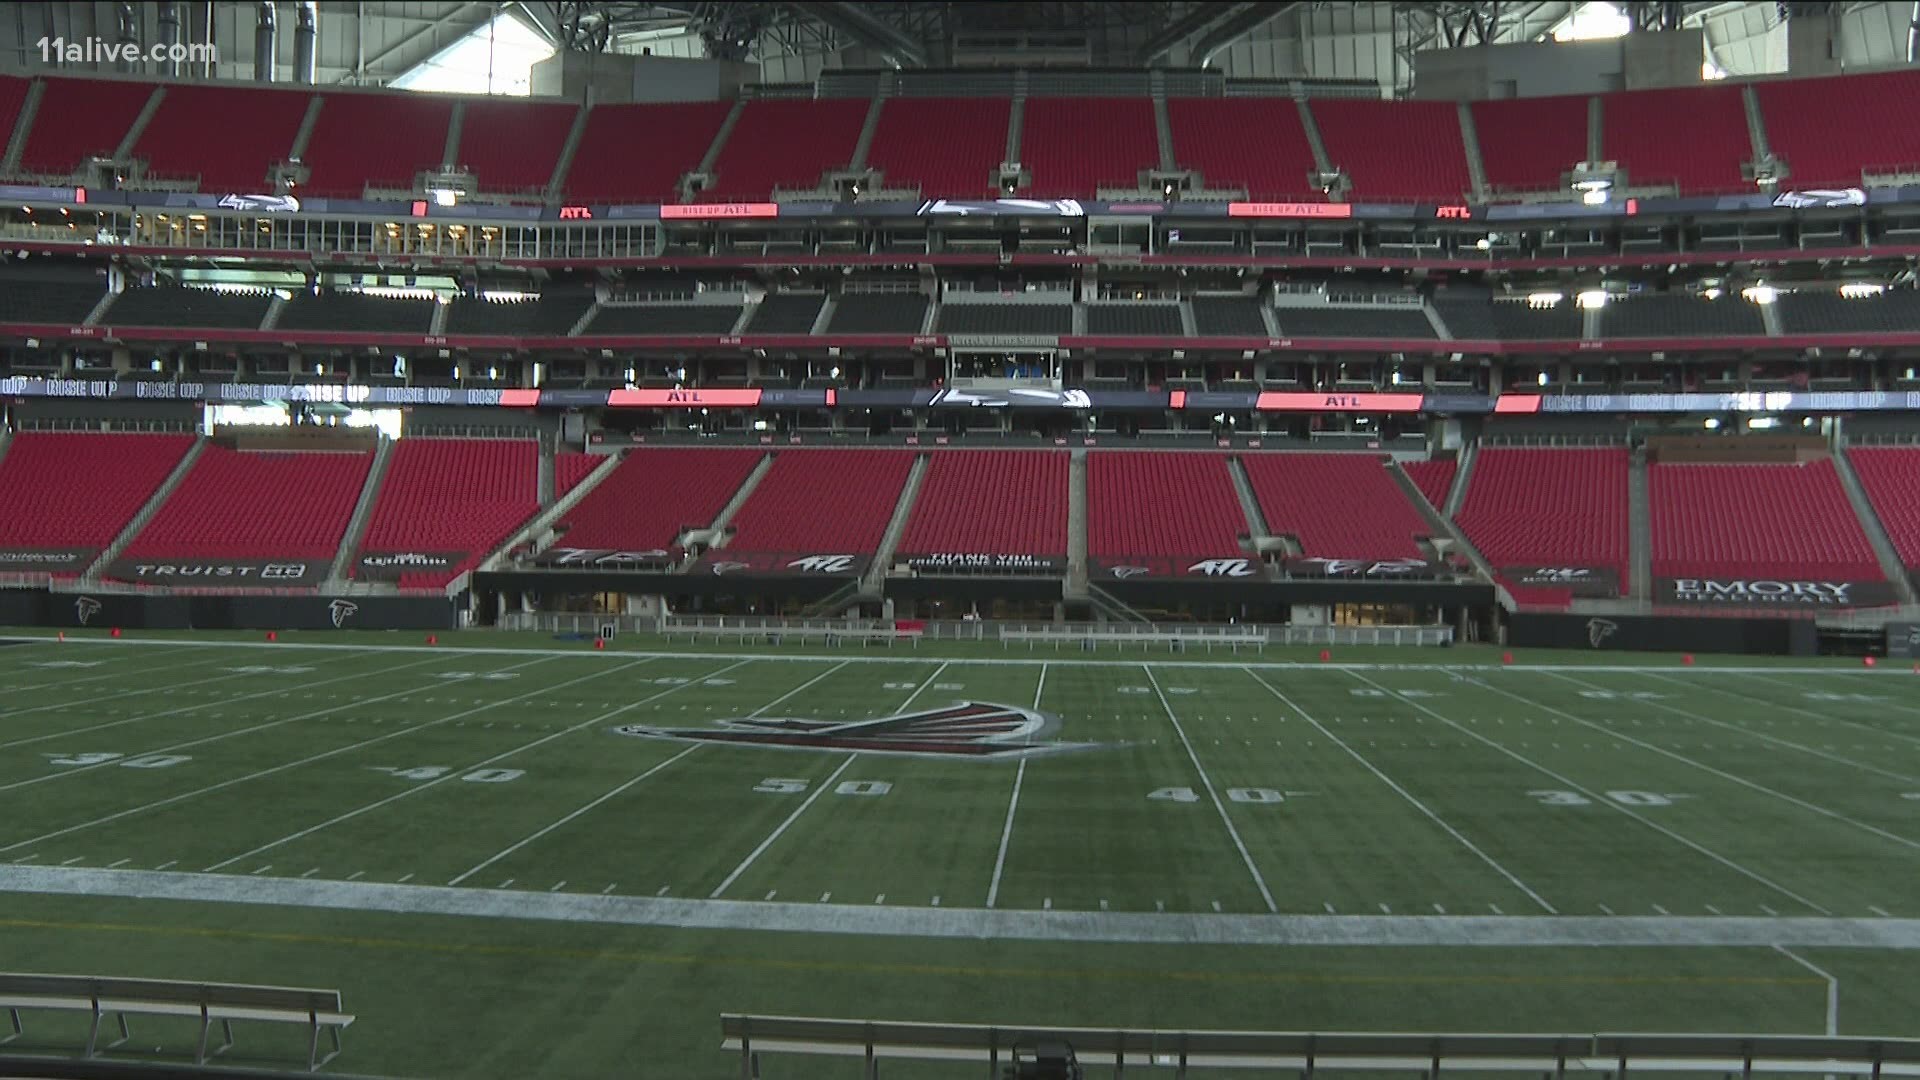 It's a painful economic consequence for the Atlanta Falcons at their relatively new stadium, which will sit mostly empty at least through September.